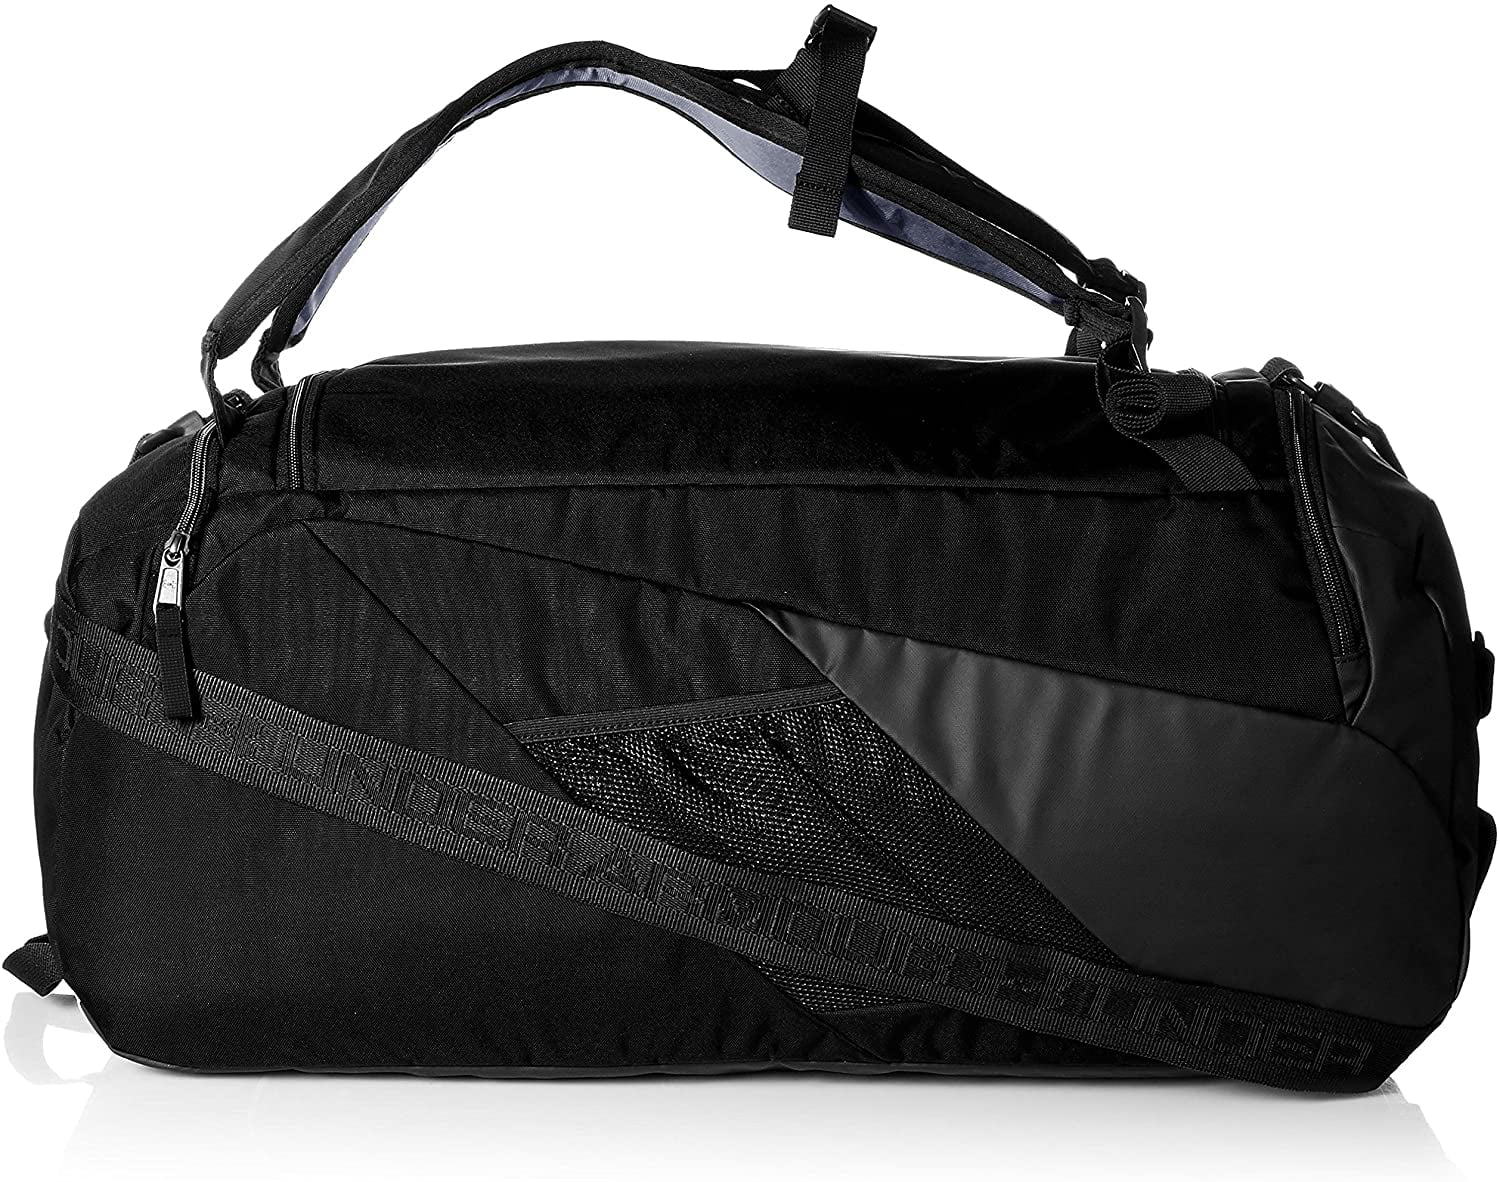 Outdoor Products Deluxe Carrying Case (Duffel) Clothing, Gear, Accessories,  Travel Essential, Black